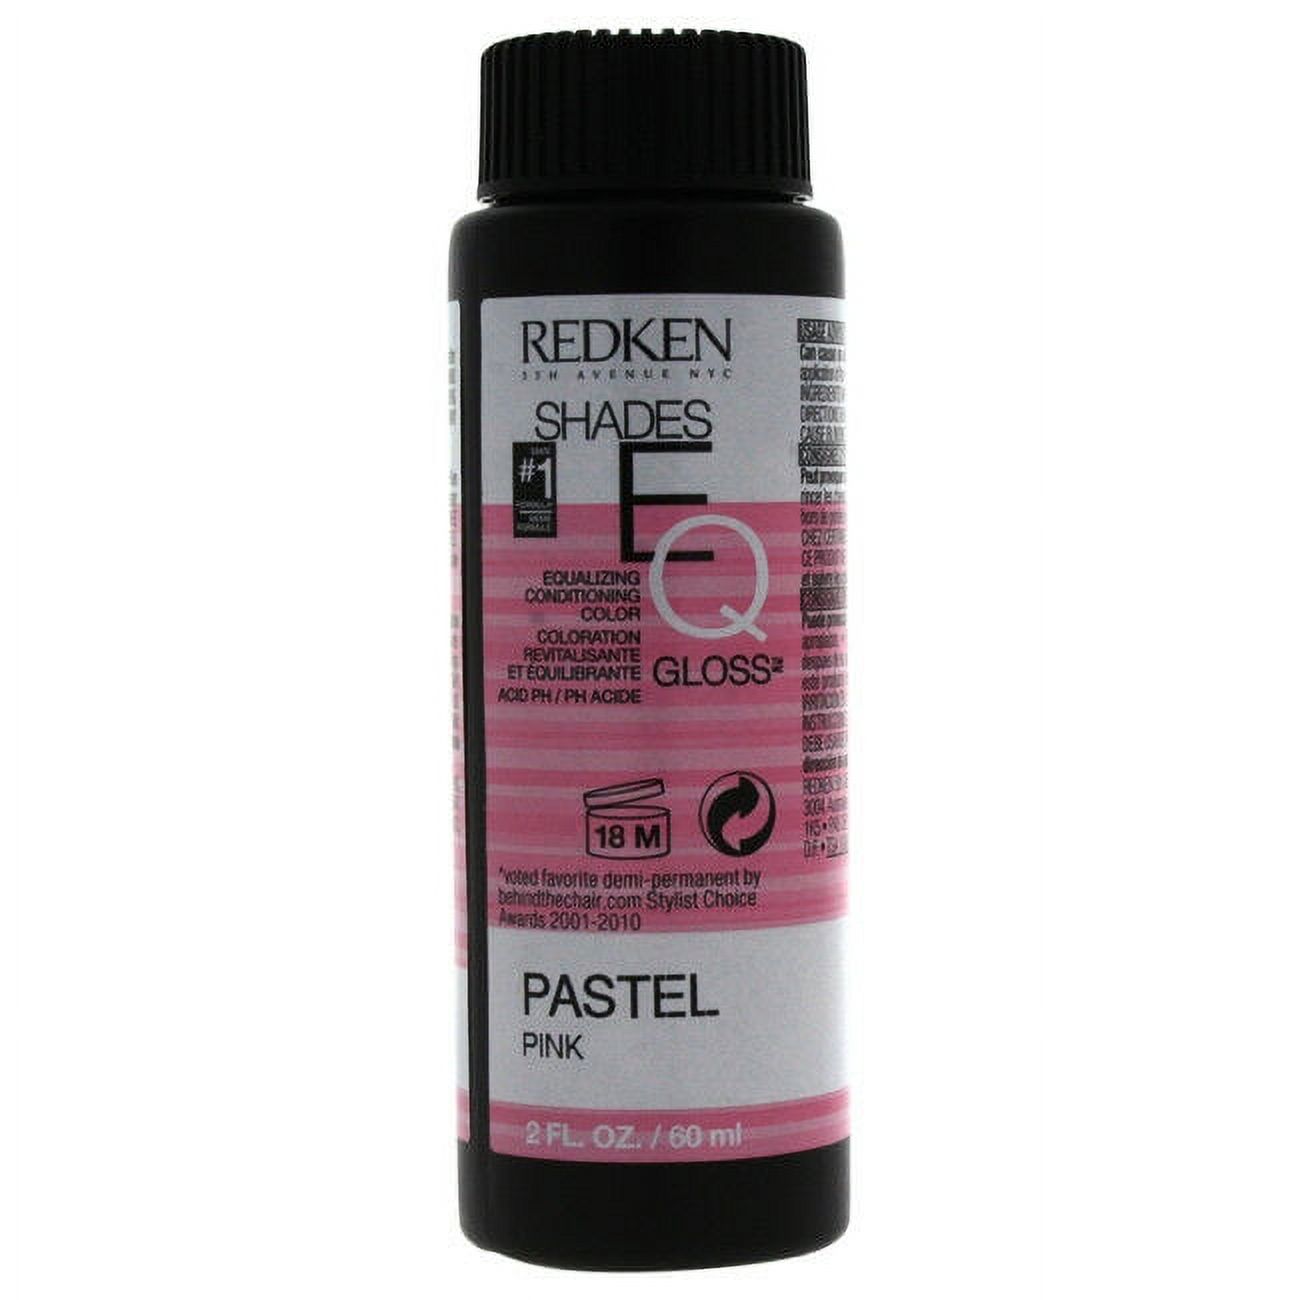 Shades EQ Color Gloss - Pastel Pink by Redken for Unisex - 2 oz Hair Color - image 1 of 1